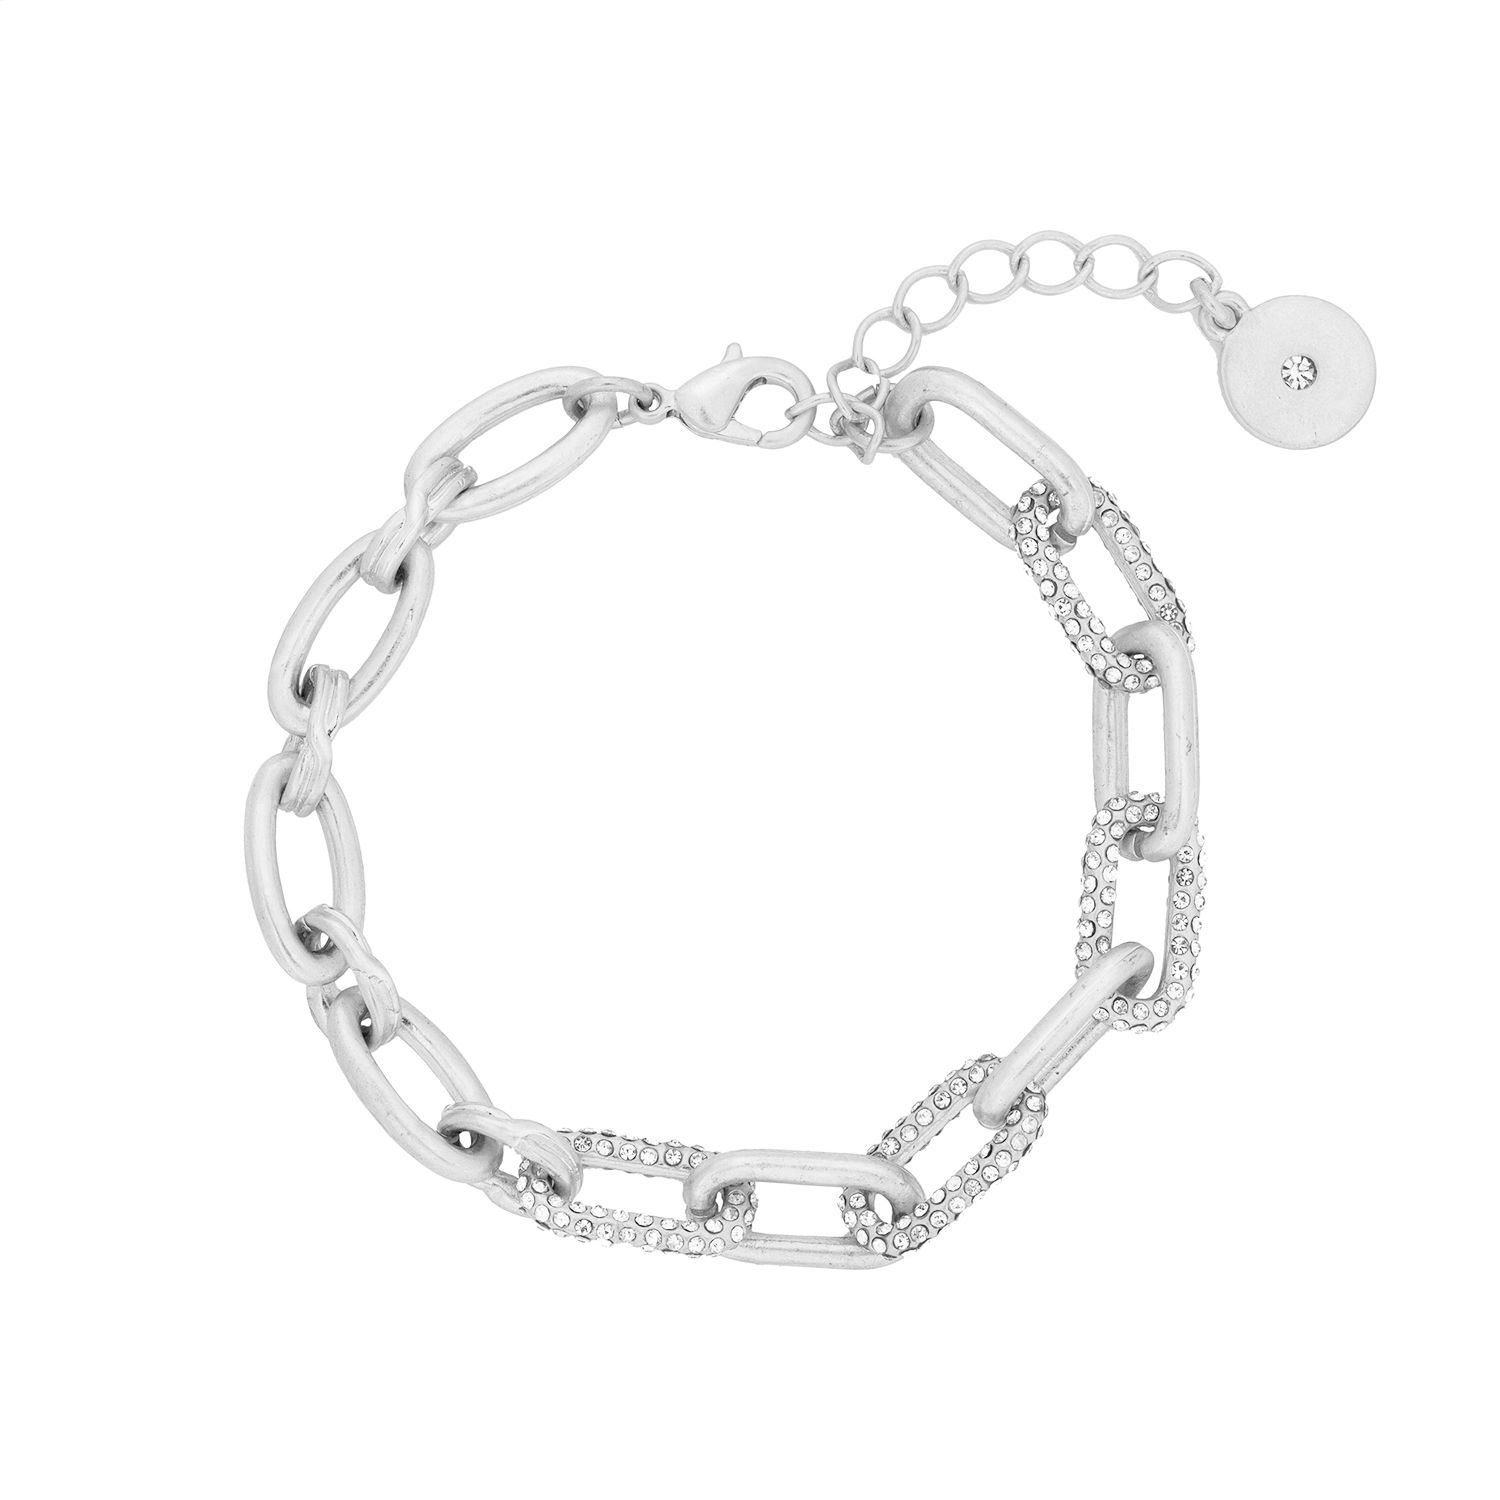 This chunky pave chain bracelet is the staple piece you need this winter! It adds such an on trend edge to any outfit, whether it's a night out dress or a jumper and jeans. The beautiful 7 inch silver plated chain features pave encrusted links on one side, giving a delicate edge to an otherwise strong piece. The chain is fastened with a lobster clasp and has a 4cm extender chain to easily adjust. It also comes with a matching necklace and they really are a match made in heaven! When in doubt, go simple and style it out.